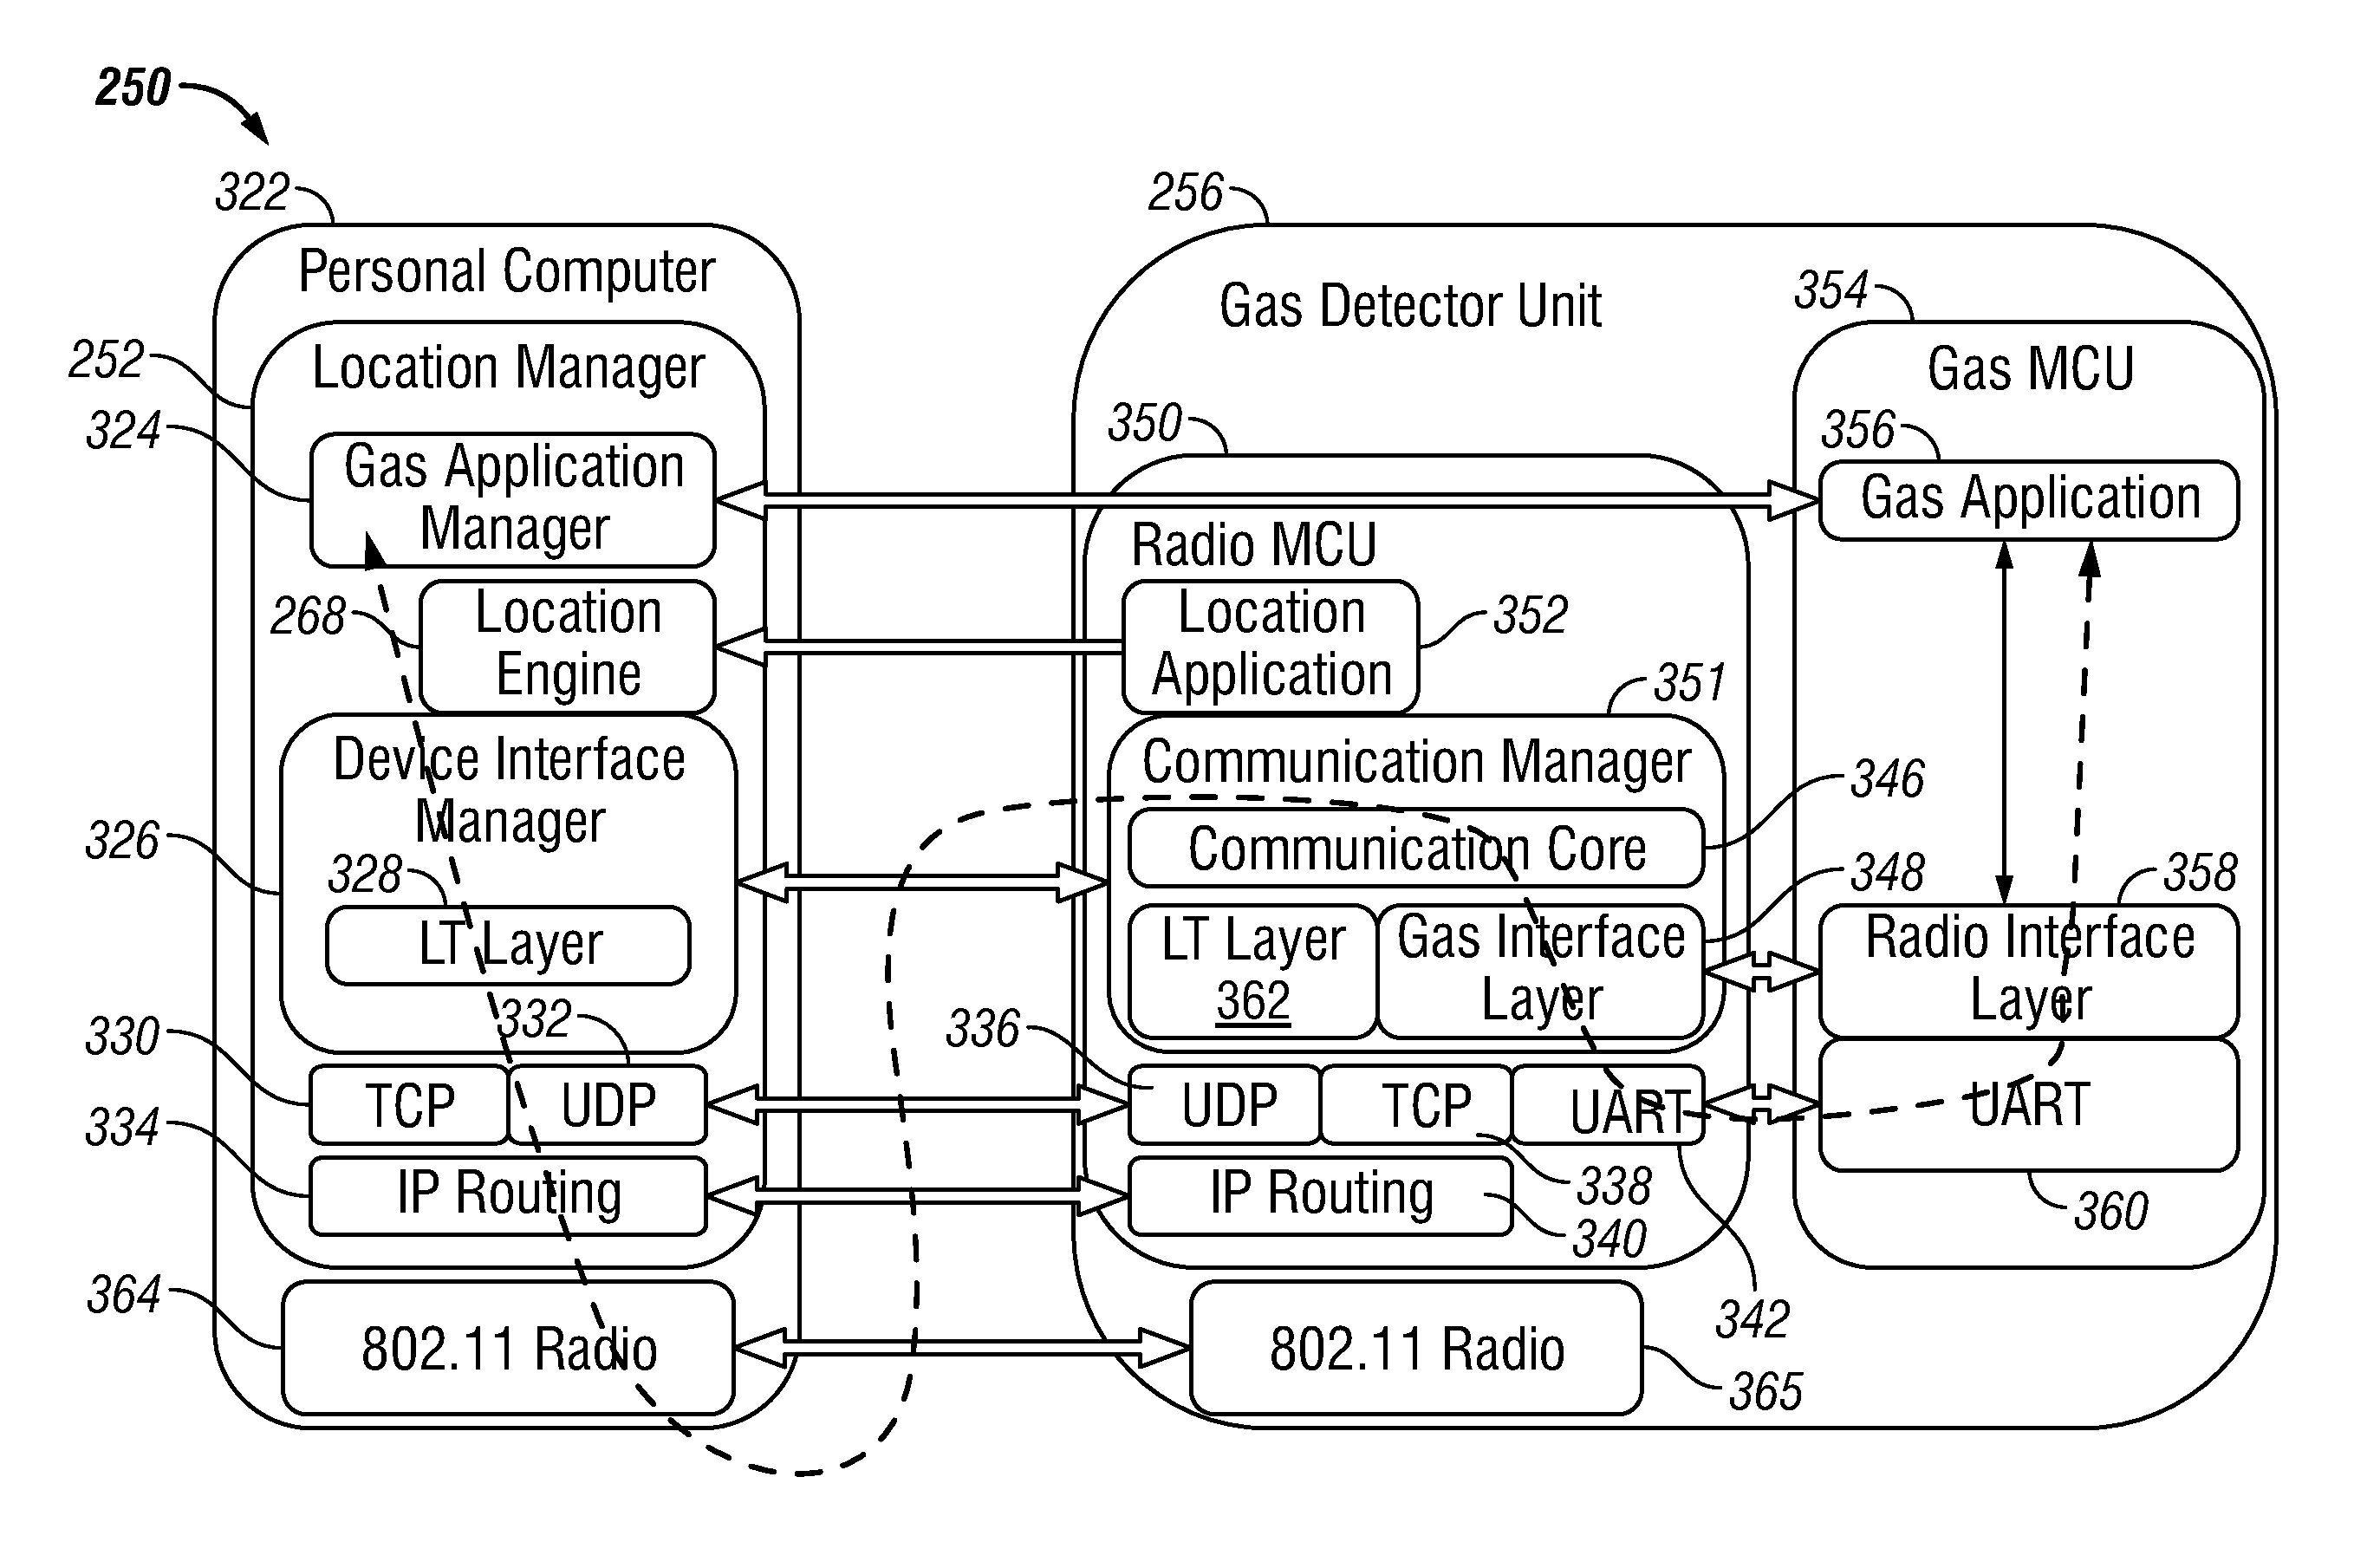 Wireless location-based system and method for detecting hazardous and non-hazardous conditions